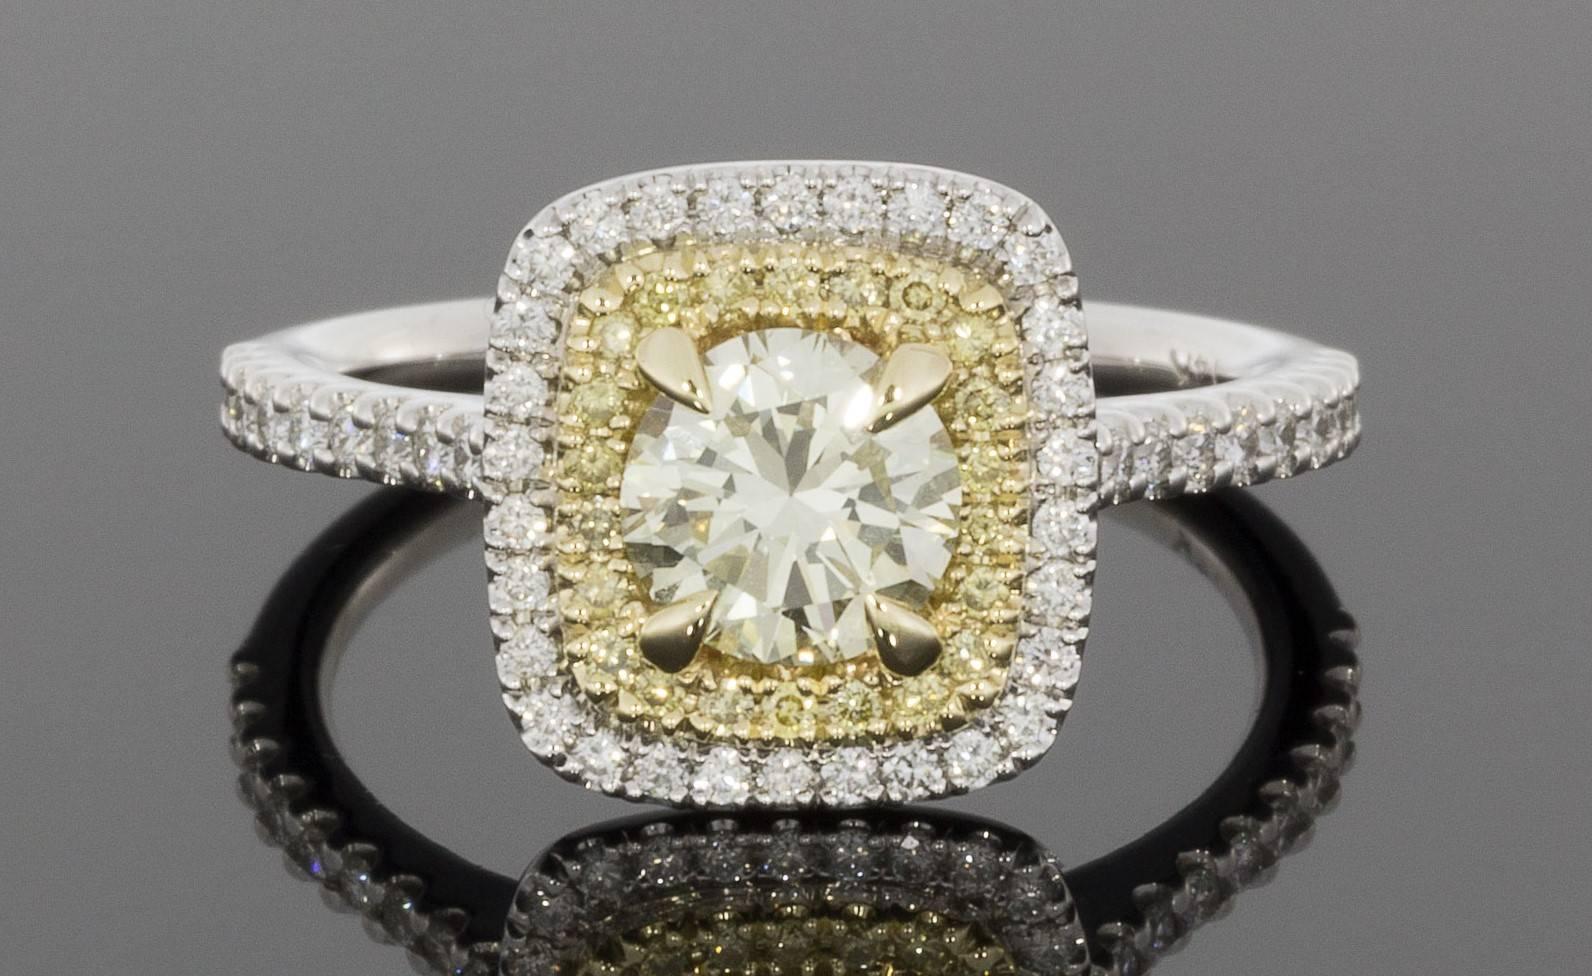 This gorgeous halo engagement ring features a stunning .74 carat, canary yellow, round brilliant cut center diamond that is prong set in a yellow gold head on a custom made ring. This center diamond grades as Fancy Light Yellow in color, is very